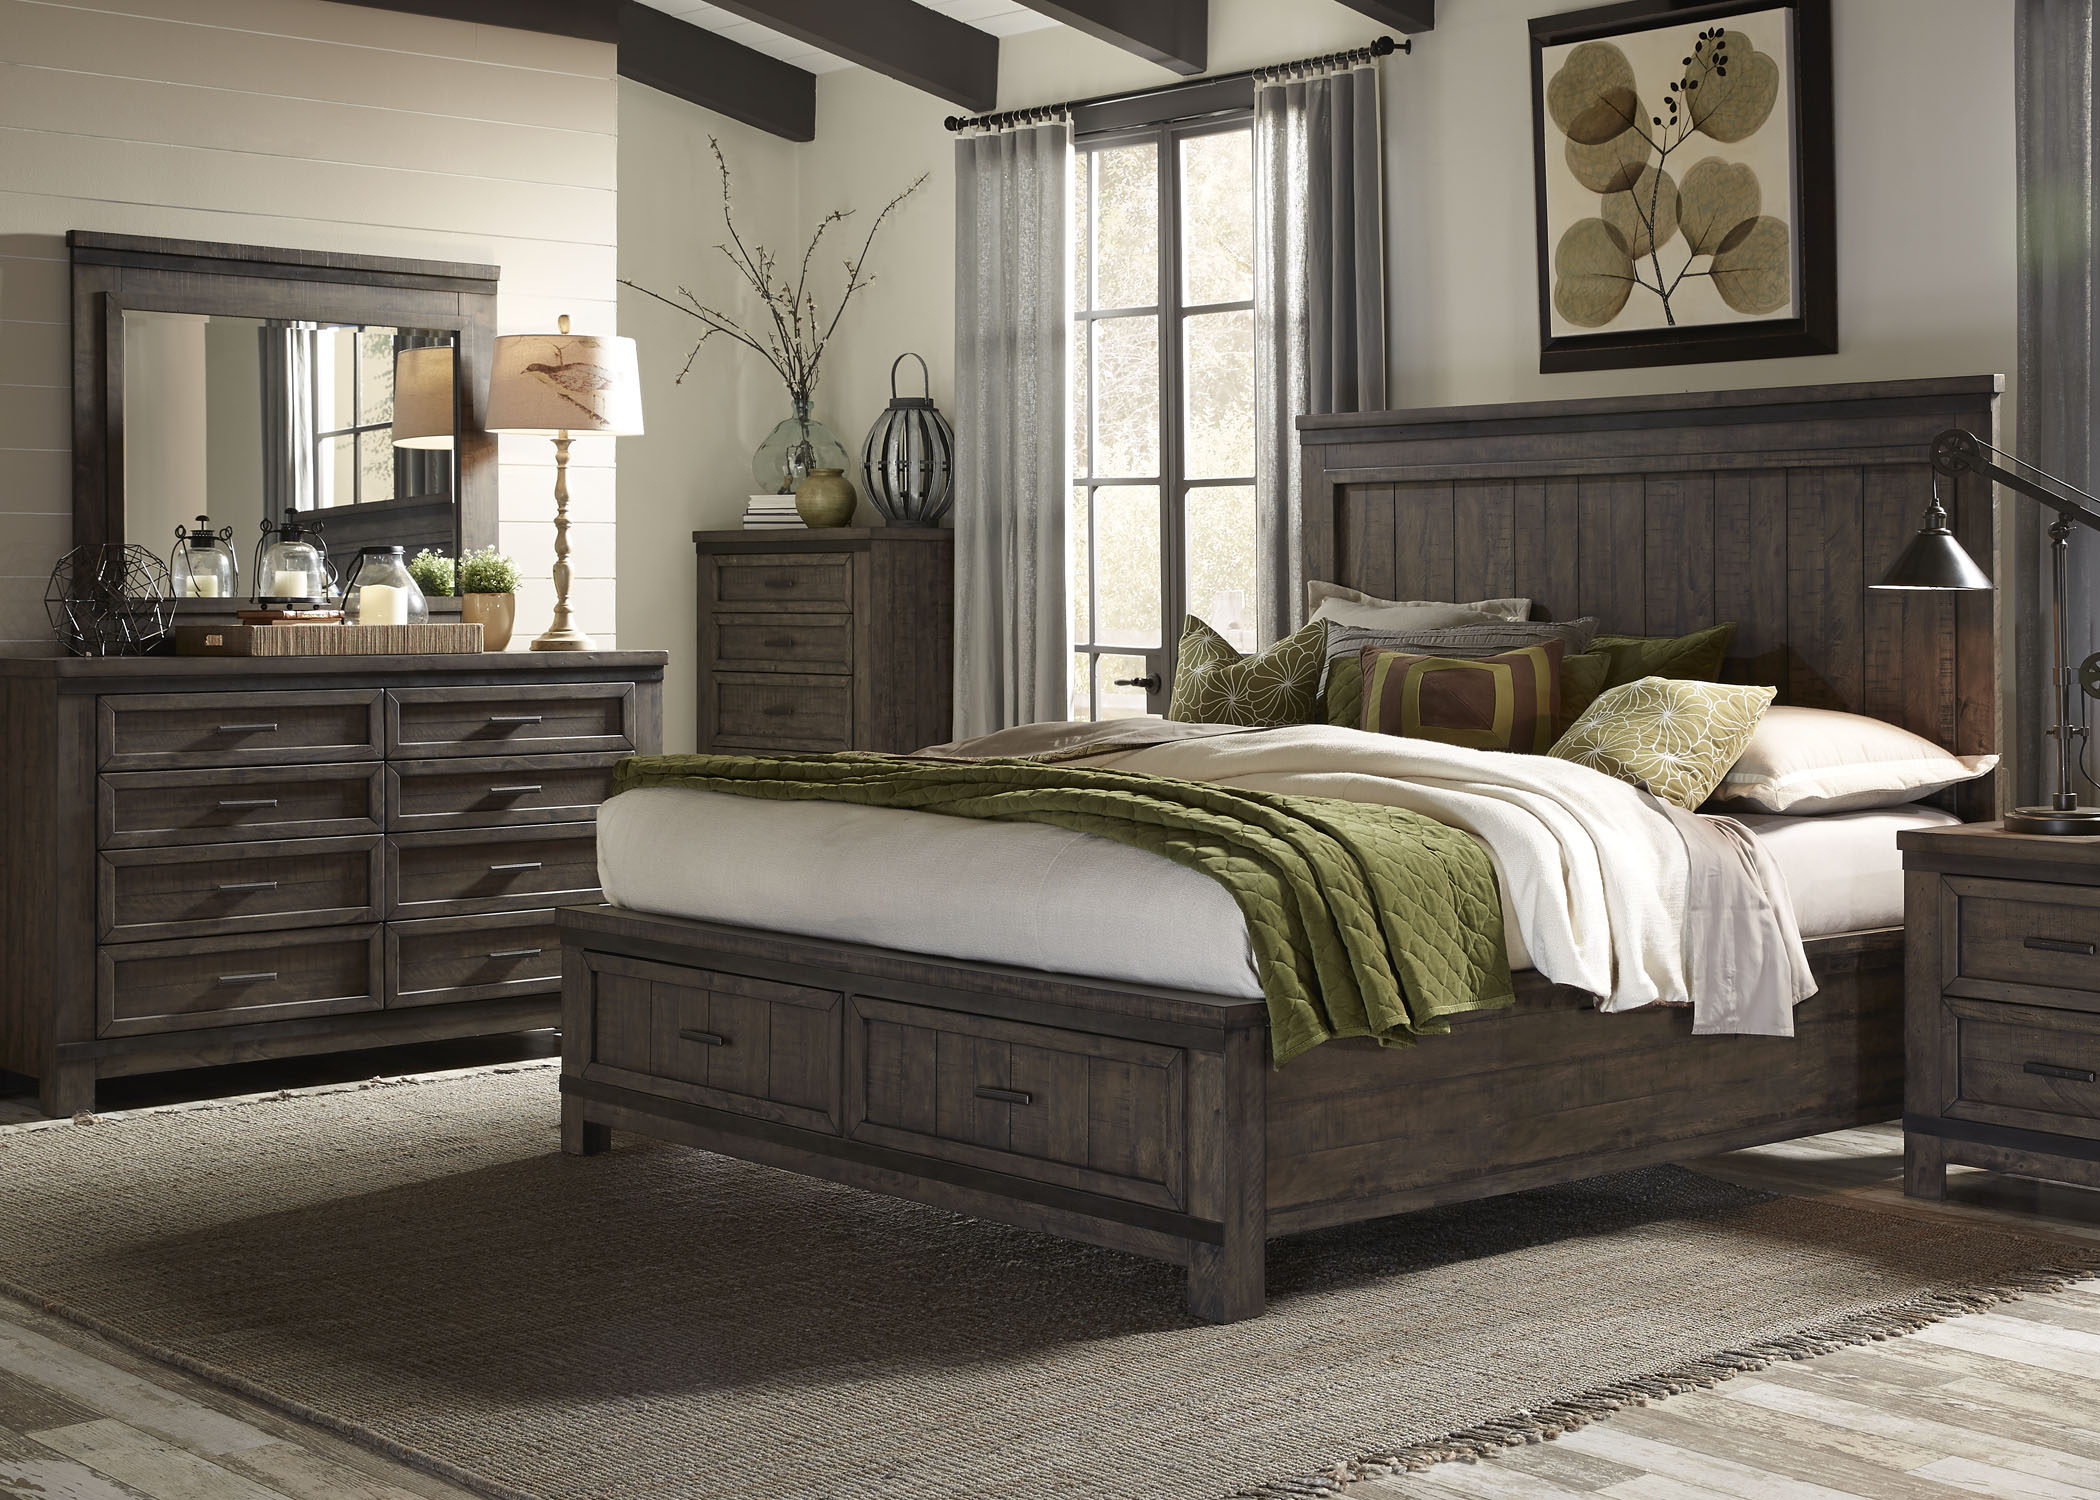 Liberty Furniture Thornwood Hills Bedroom King Storage Bed, Dresser, and Mirror Collection